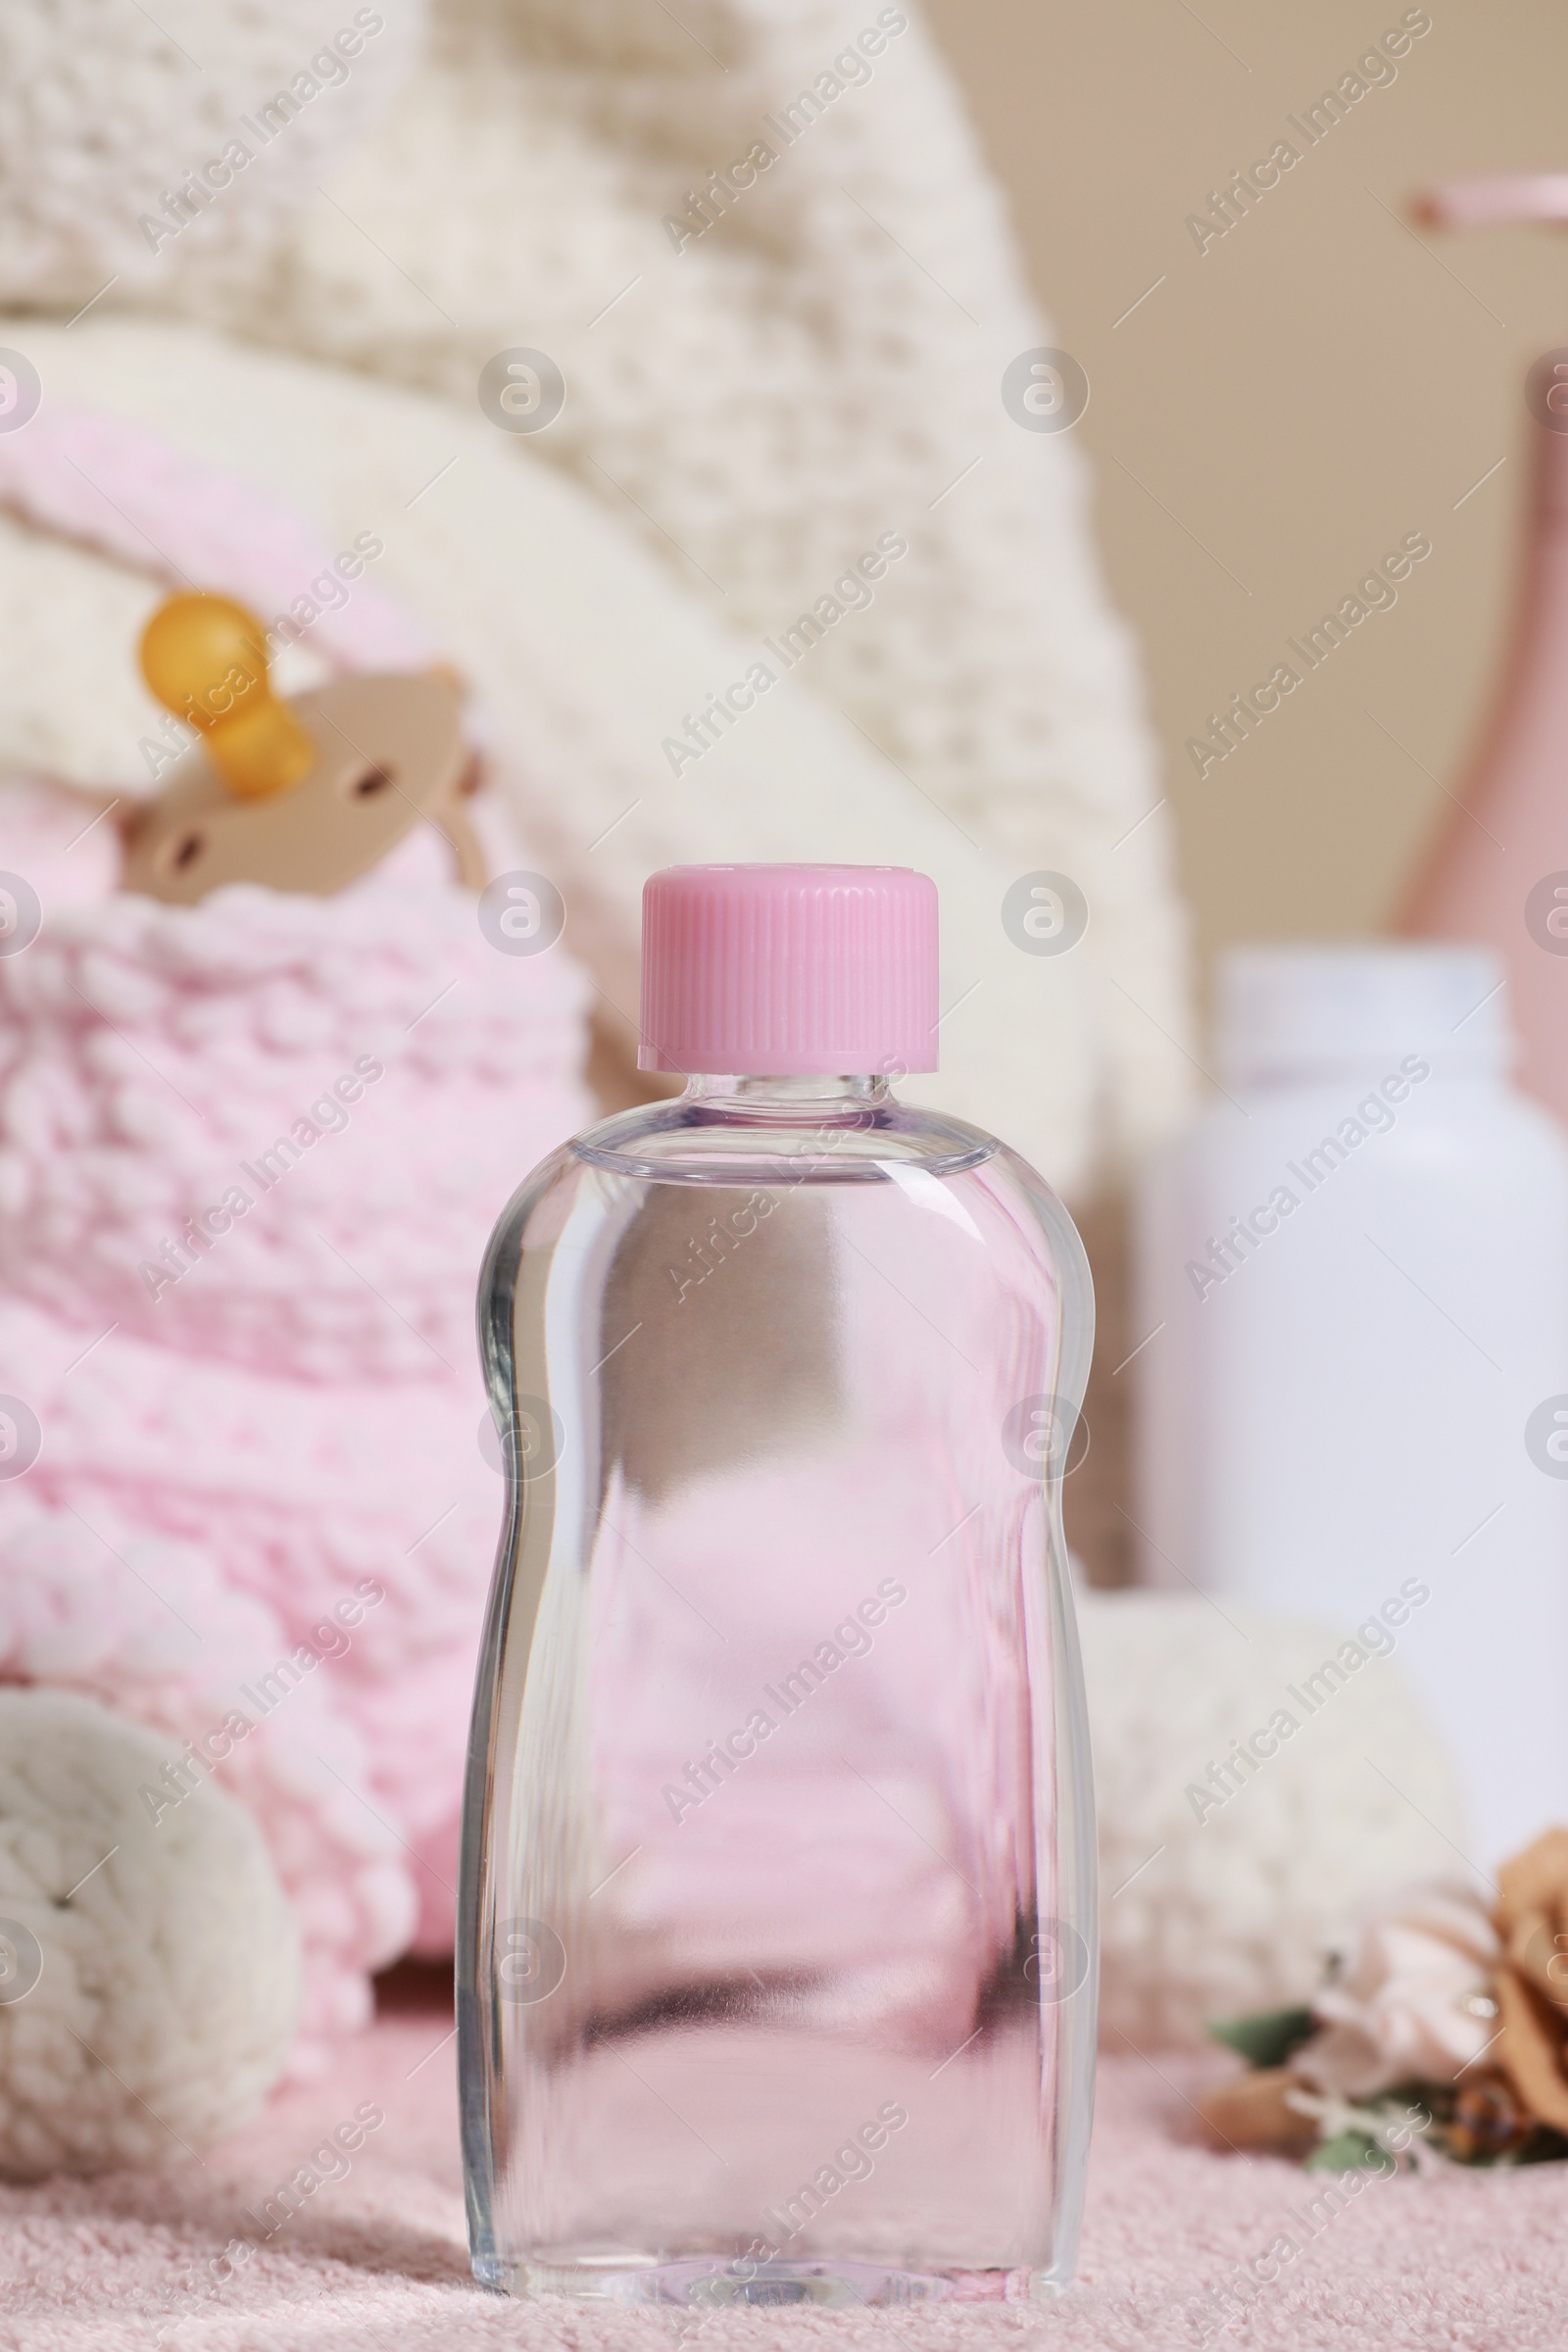 Photo of Bottle of baby cosmetic product on pink towel